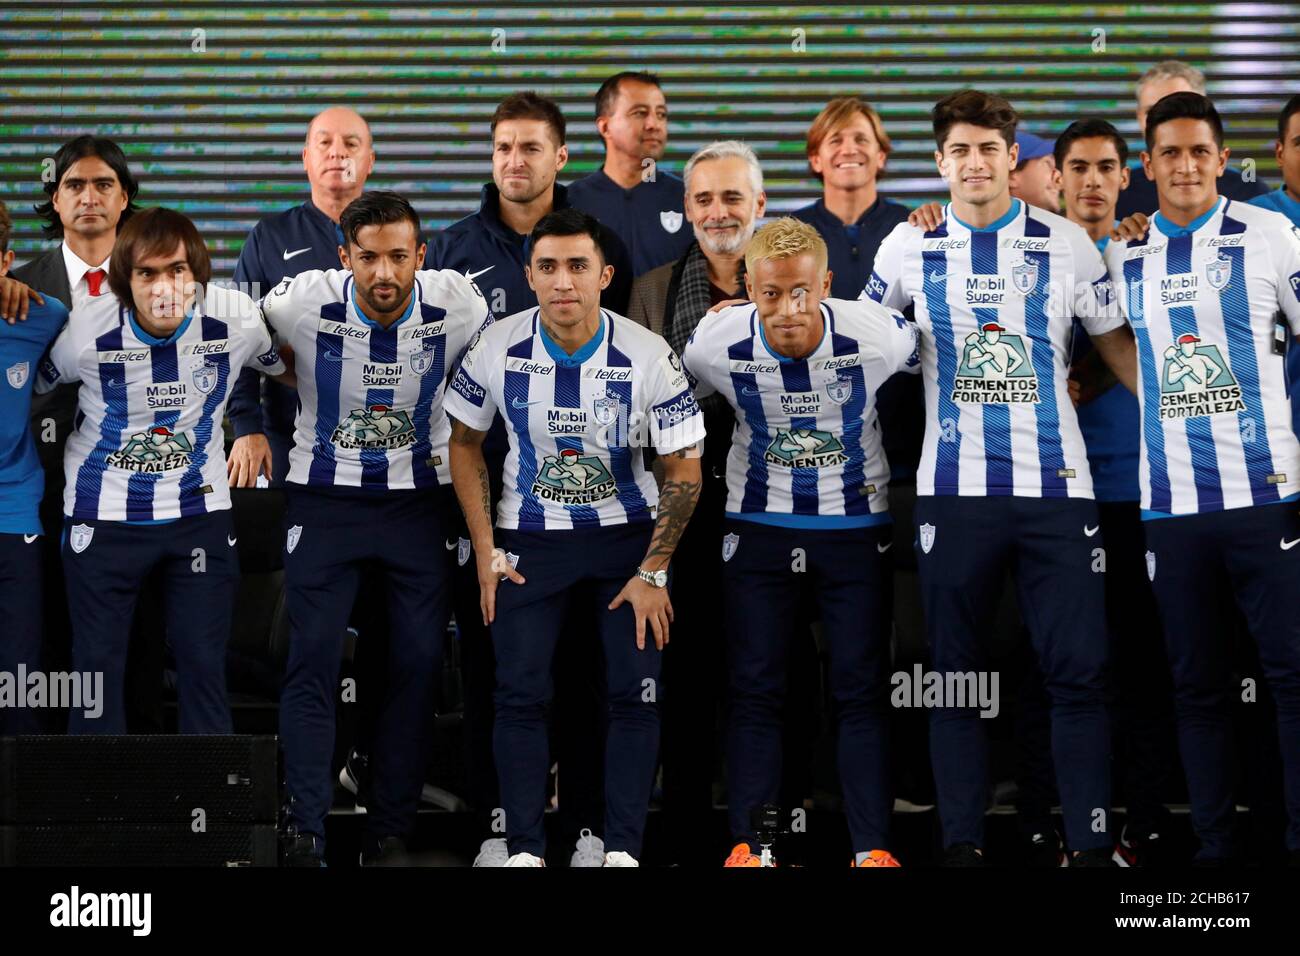 Football Soccer - Presentation of Pachuca's new player Japan's Keisuke Honda - Goalkeeper Academy Miguel Calero, Pachuca, Mexico - July 18, 2017. Keisuke Honda poses with other new players of Pachuca during his official presentation. REUTERS/Edgard Garrido Stock Photo